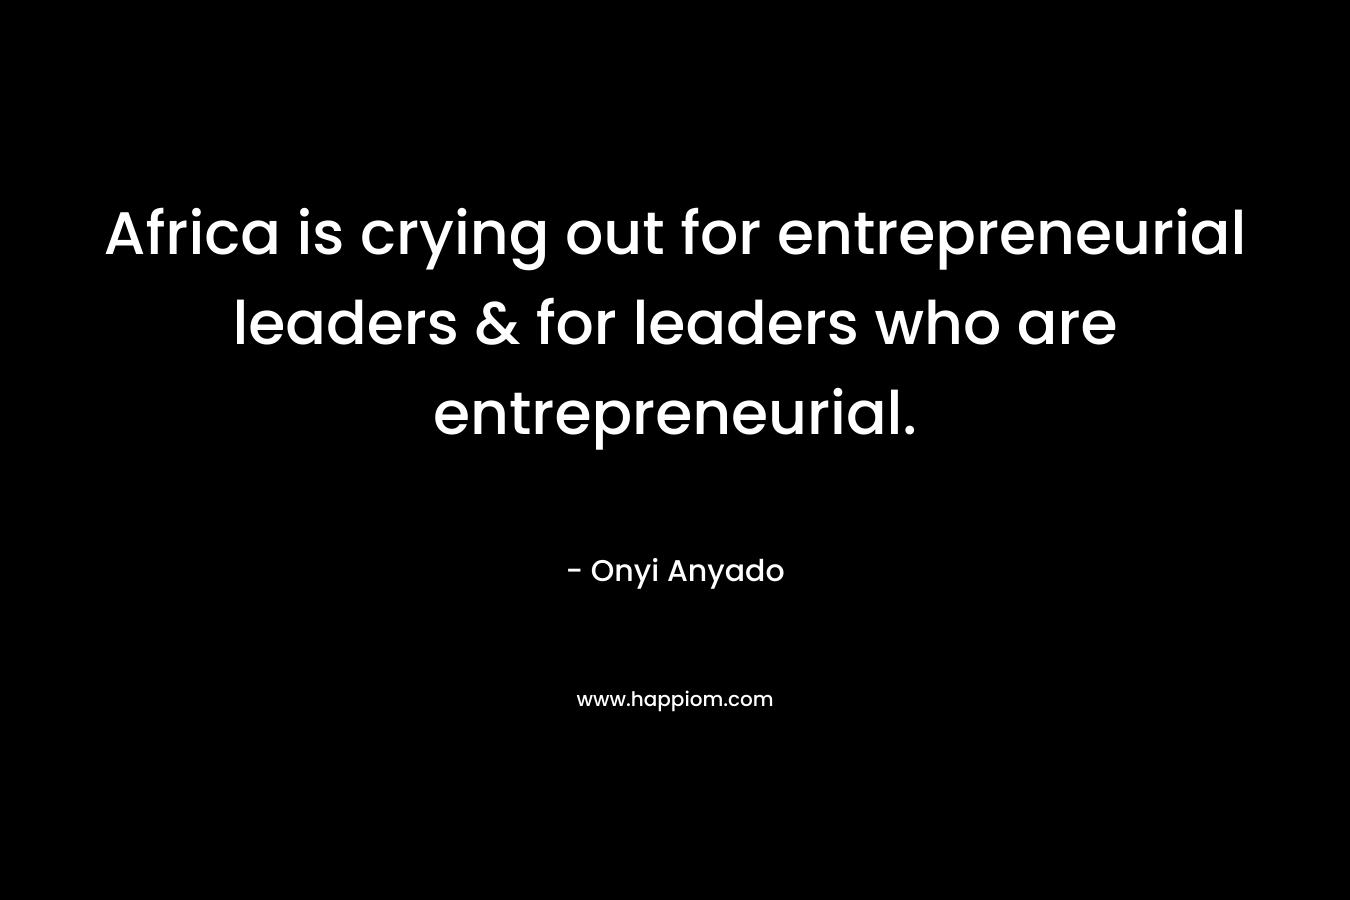 Africa is crying out for entrepreneurial leaders & for leaders who are entrepreneurial. – Onyi Anyado